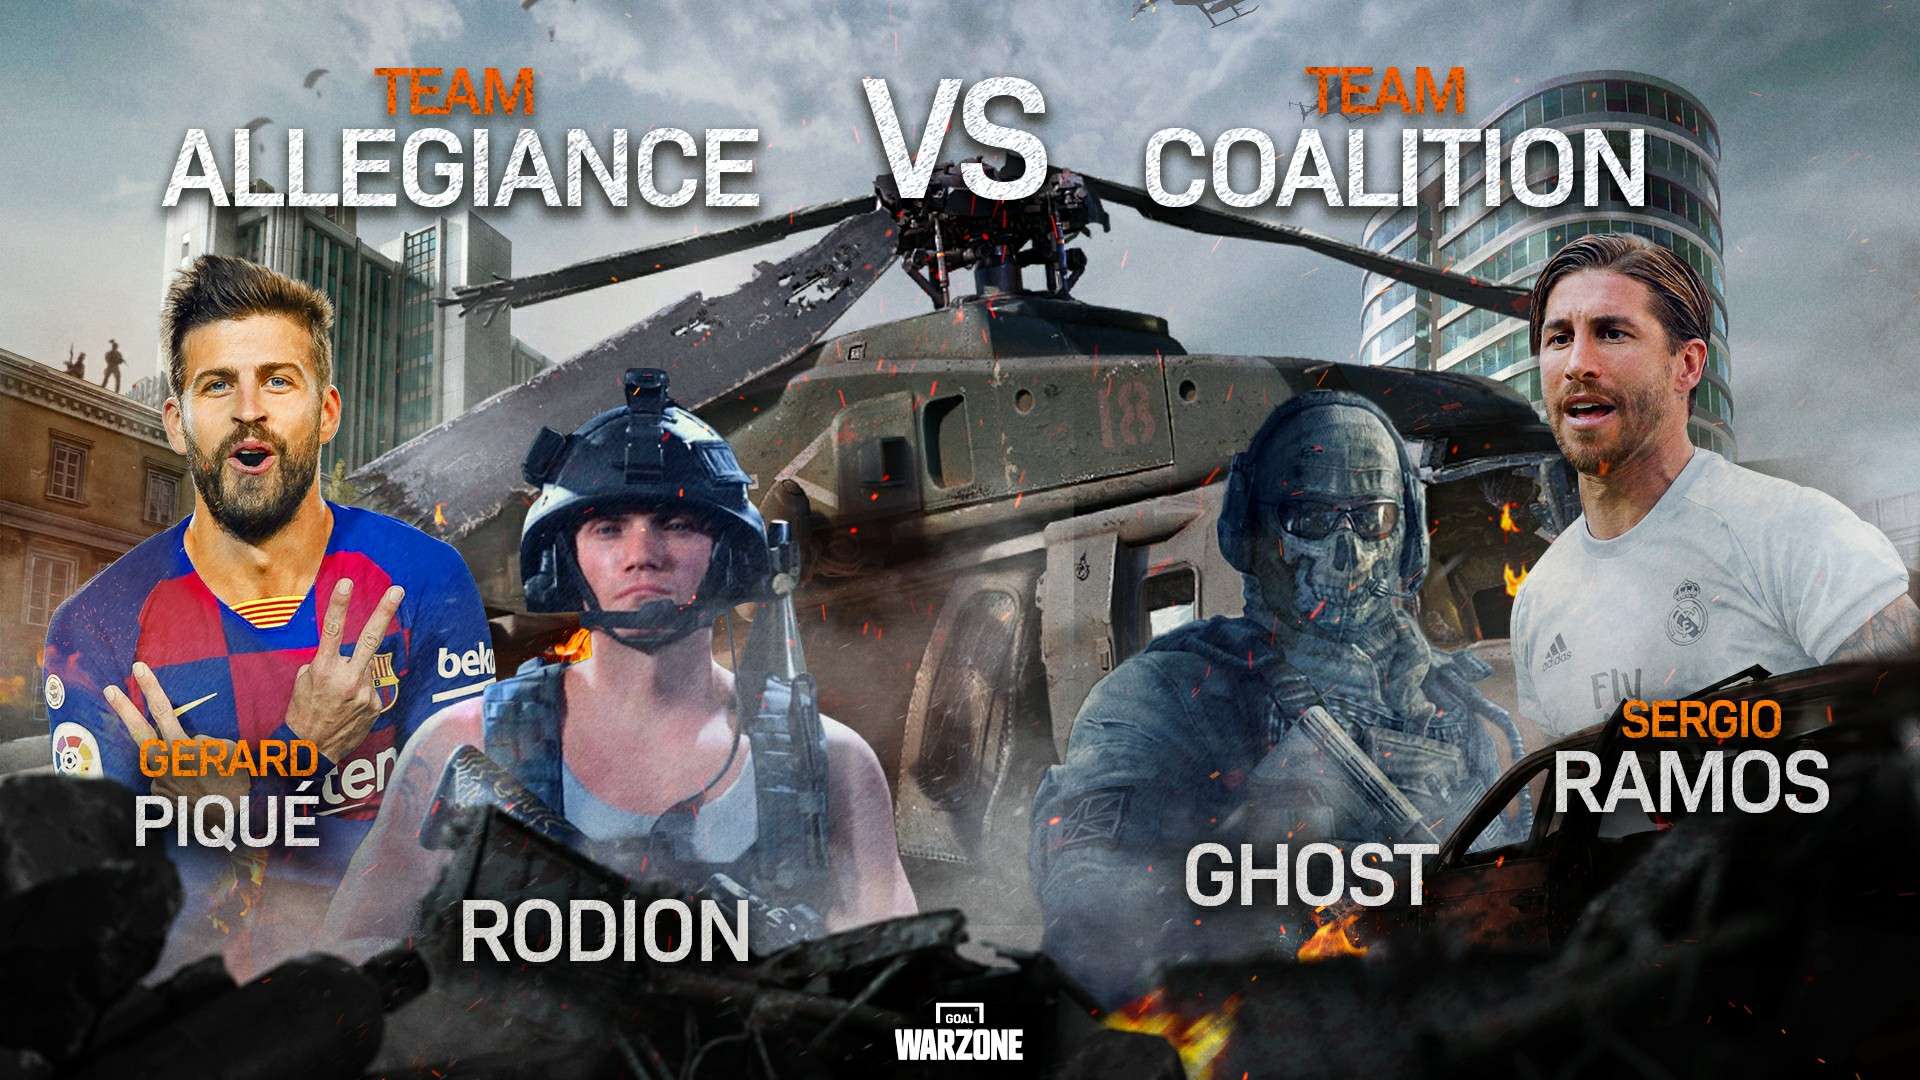 Ghost vs Rodion warzone